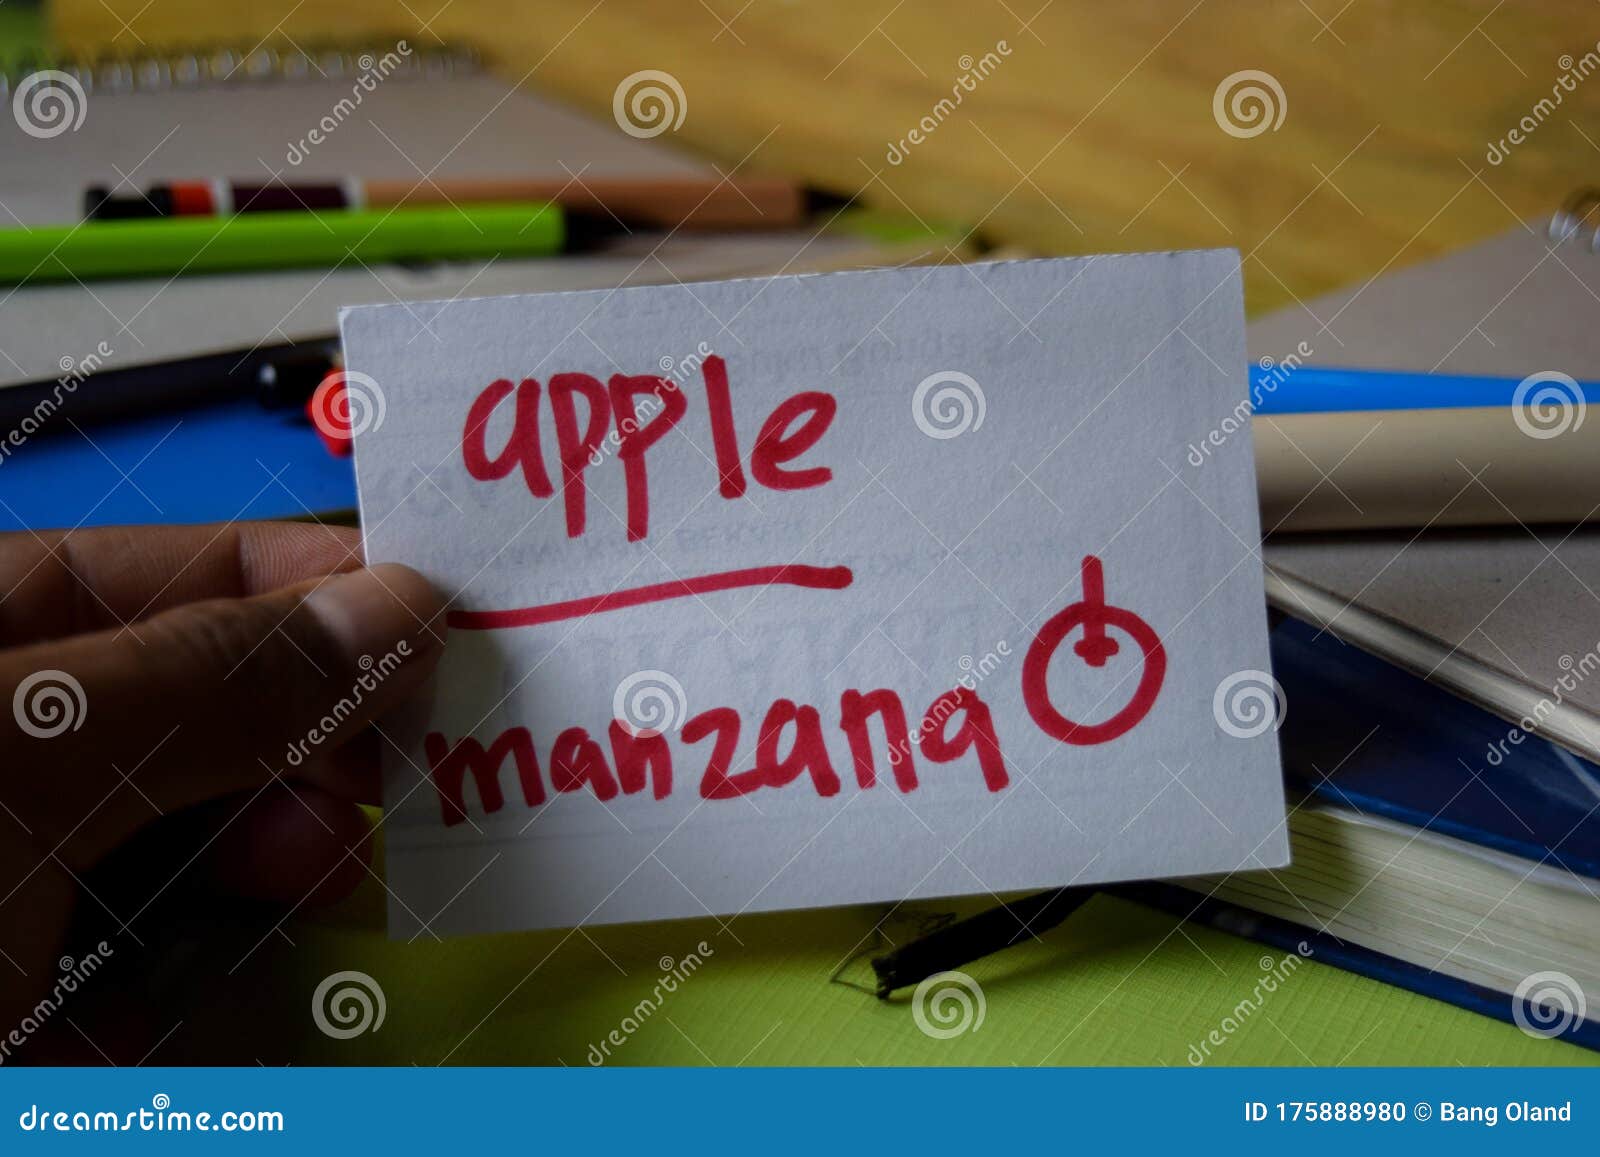 manzana write on a sticky note  on office desk. learning spanish language concept